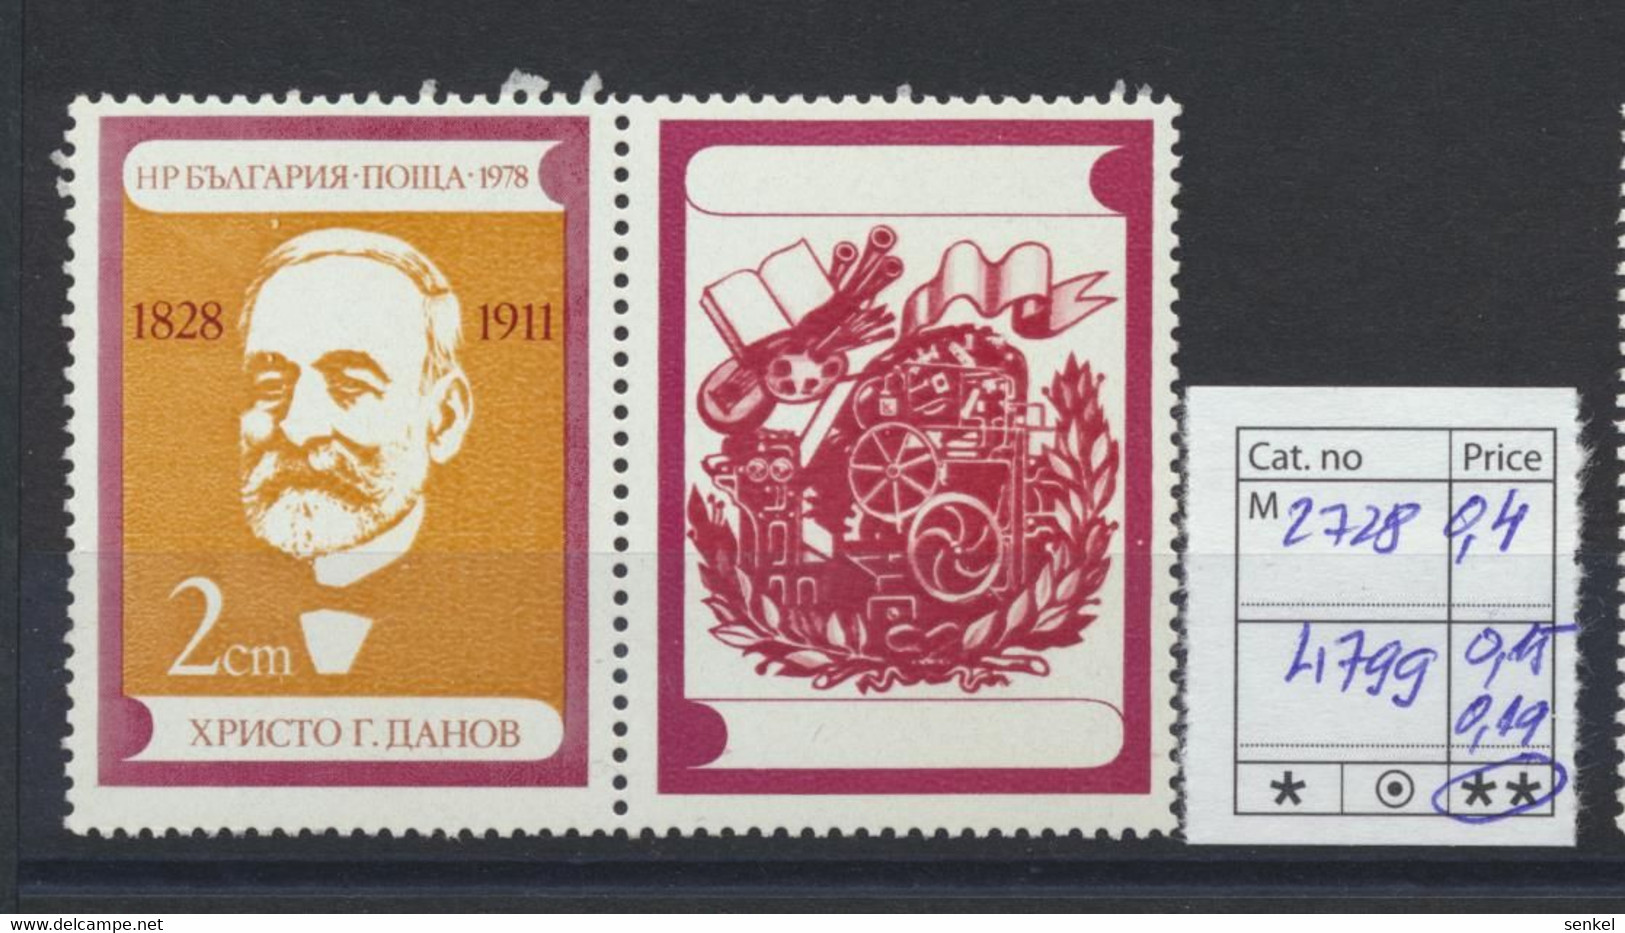 4778 - 4810 Bulgaria 1978 different stamps Red Cross TV history art literature flowers birds sport exhibition